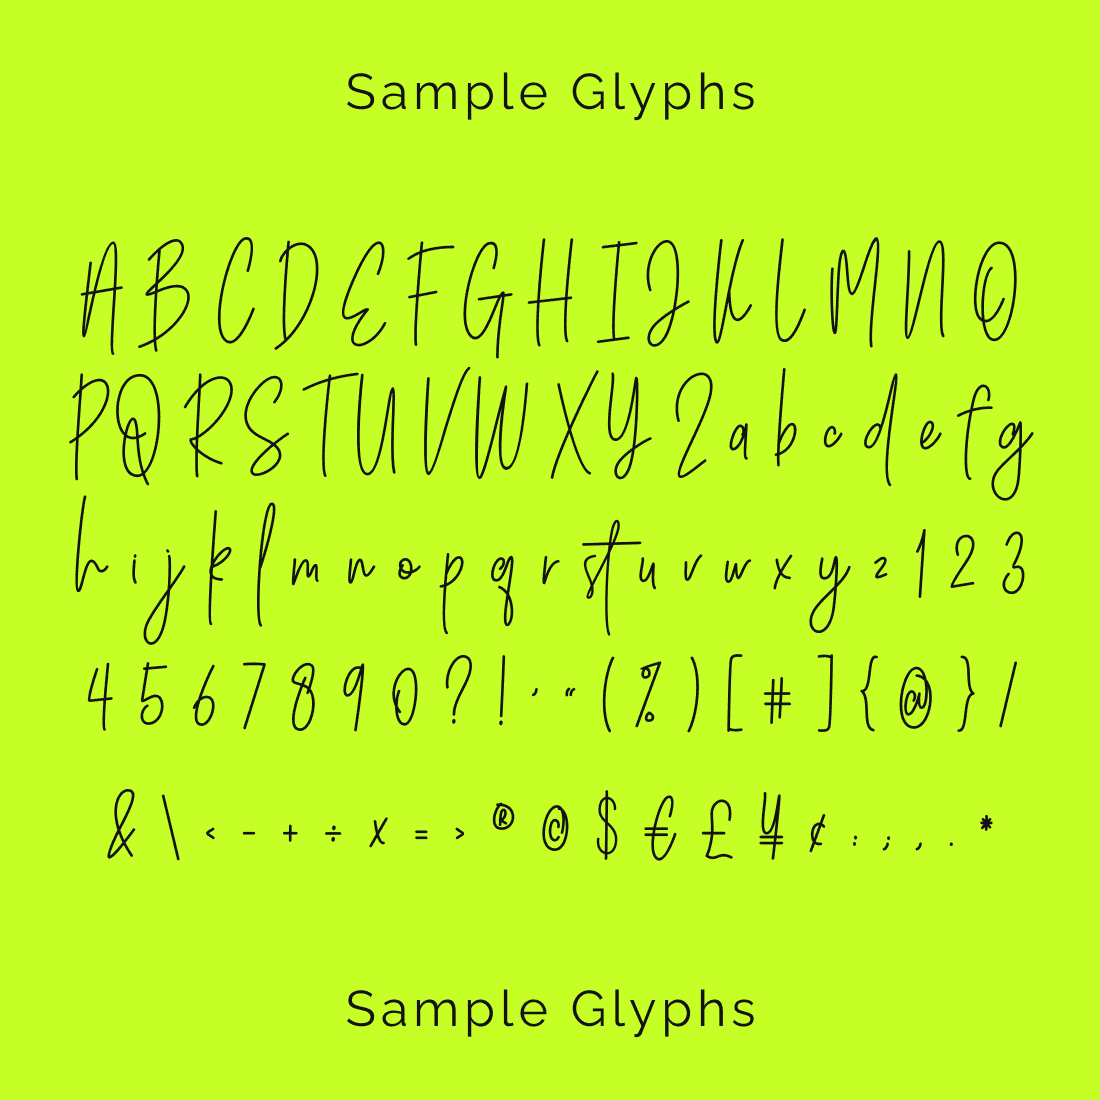 Patrick Cleo Free Font sample glyphs preview.